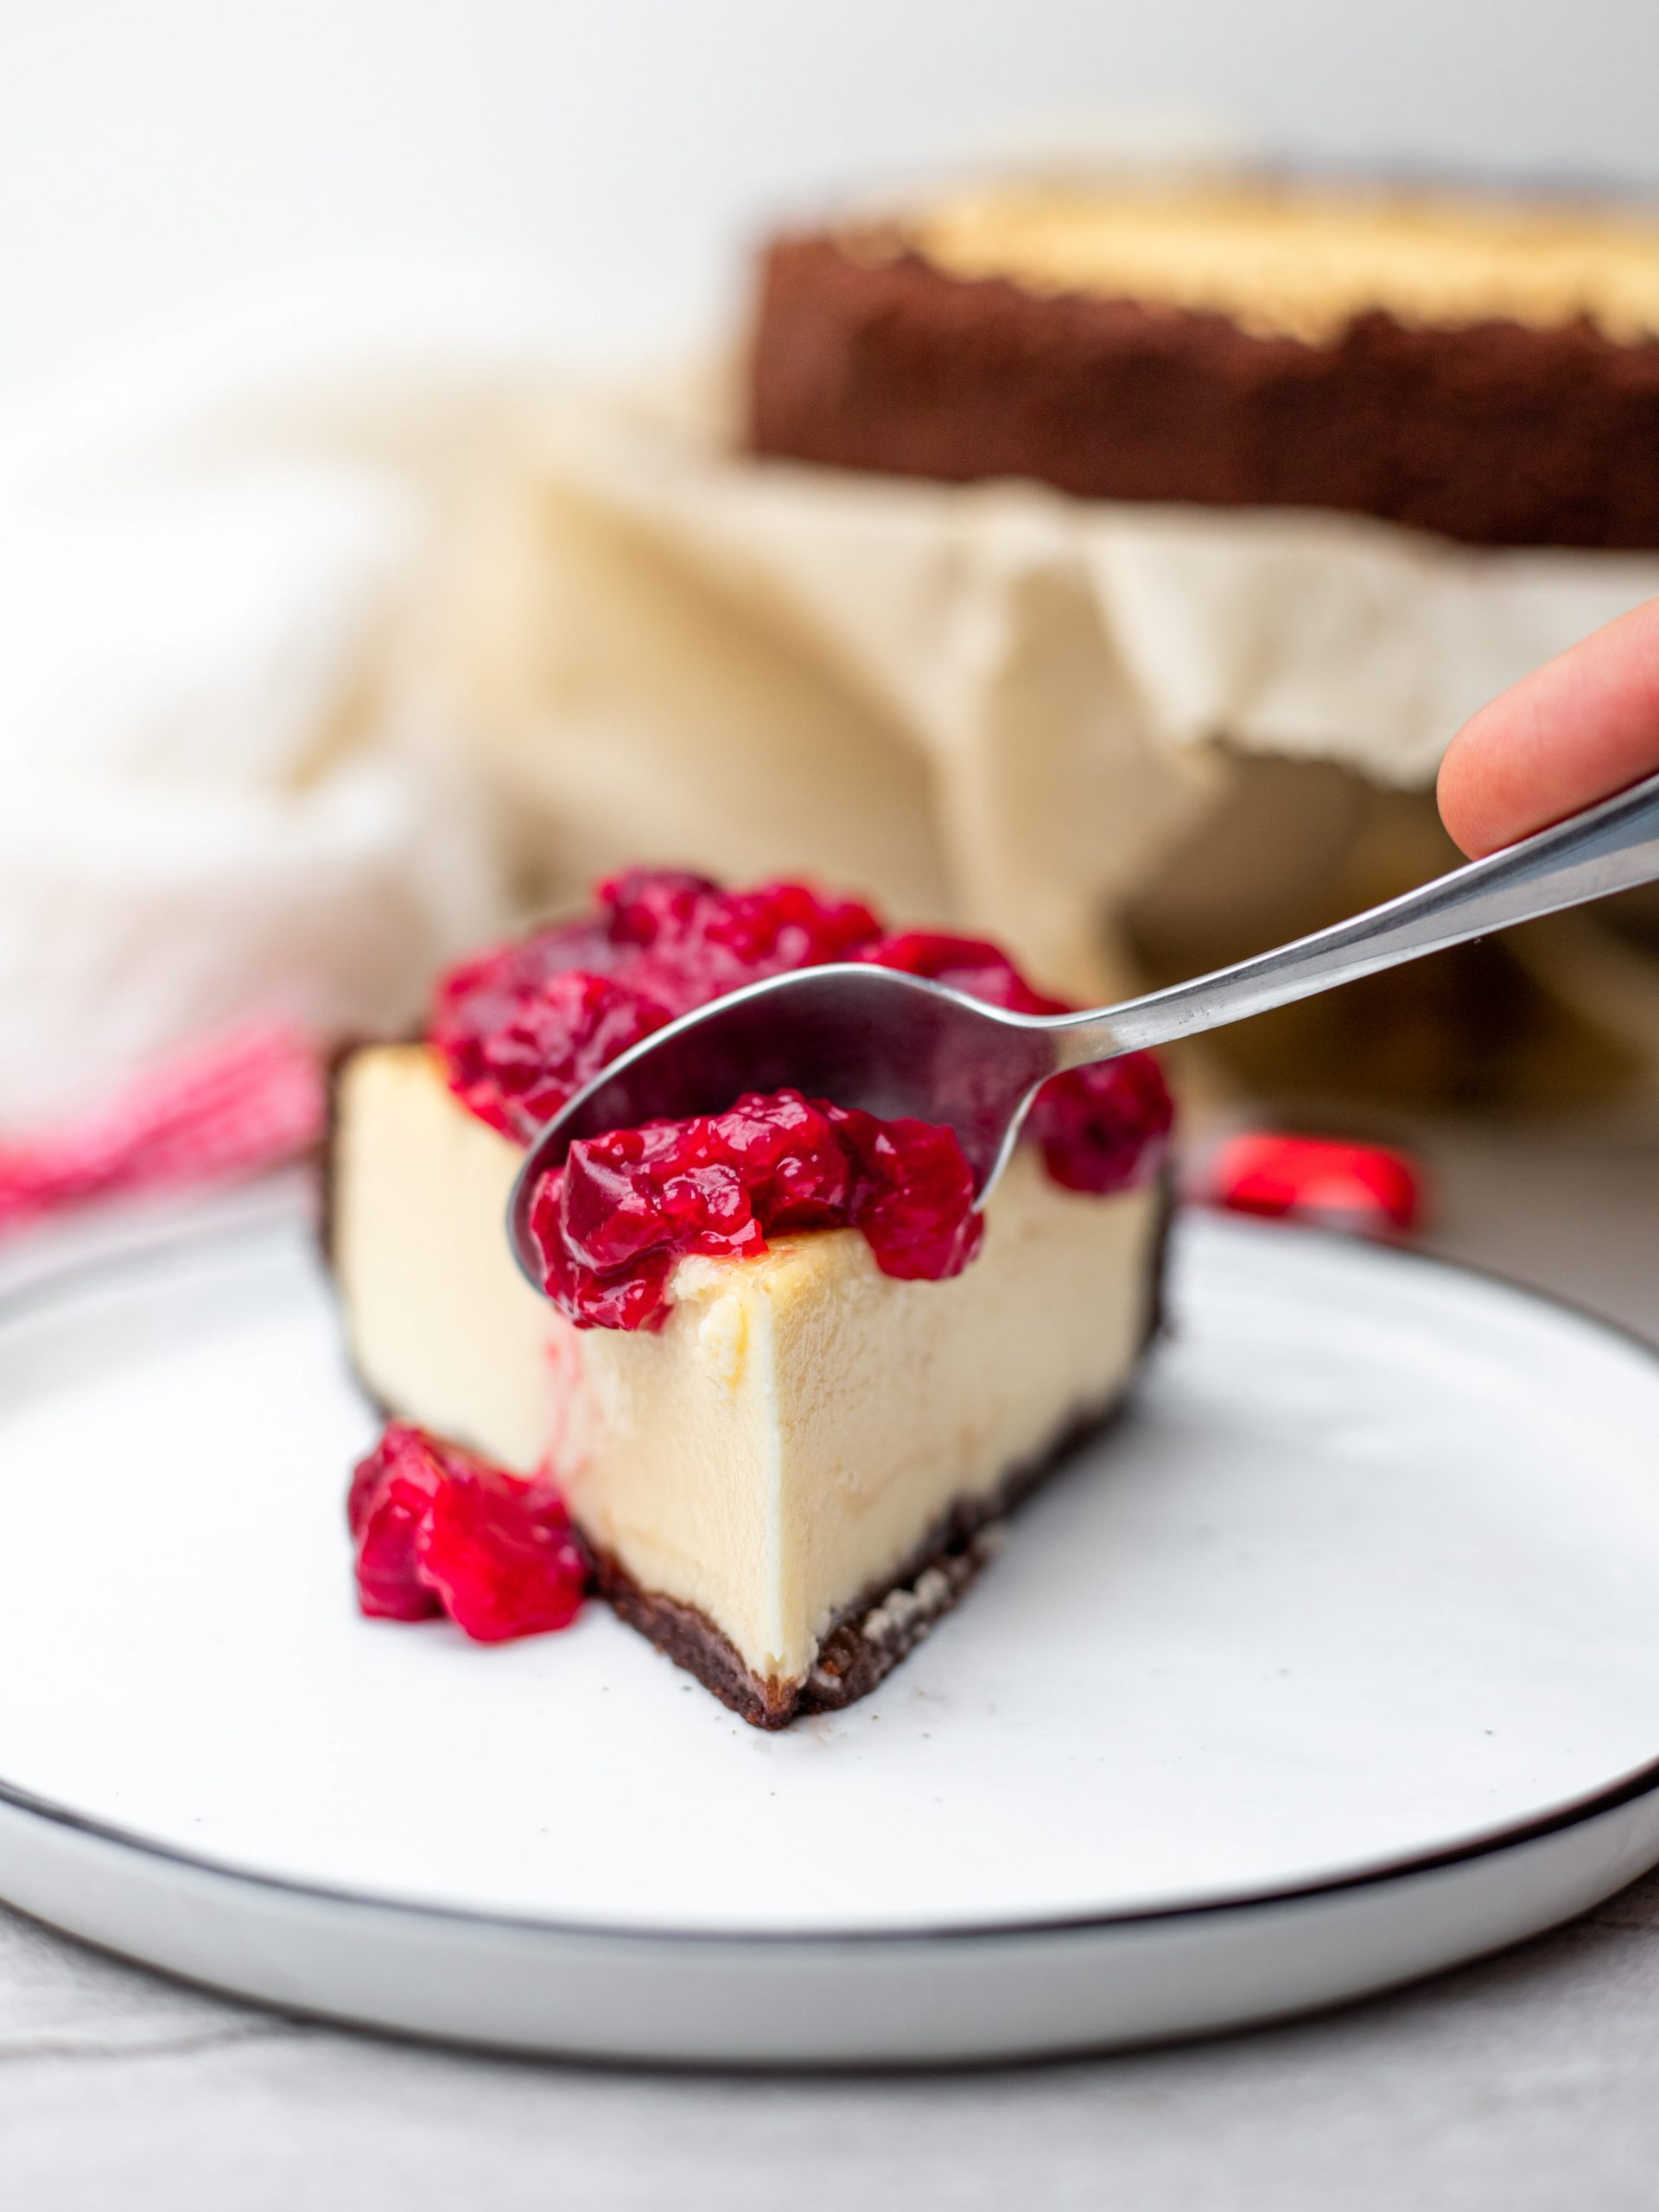 New York cheesecake with a little twist